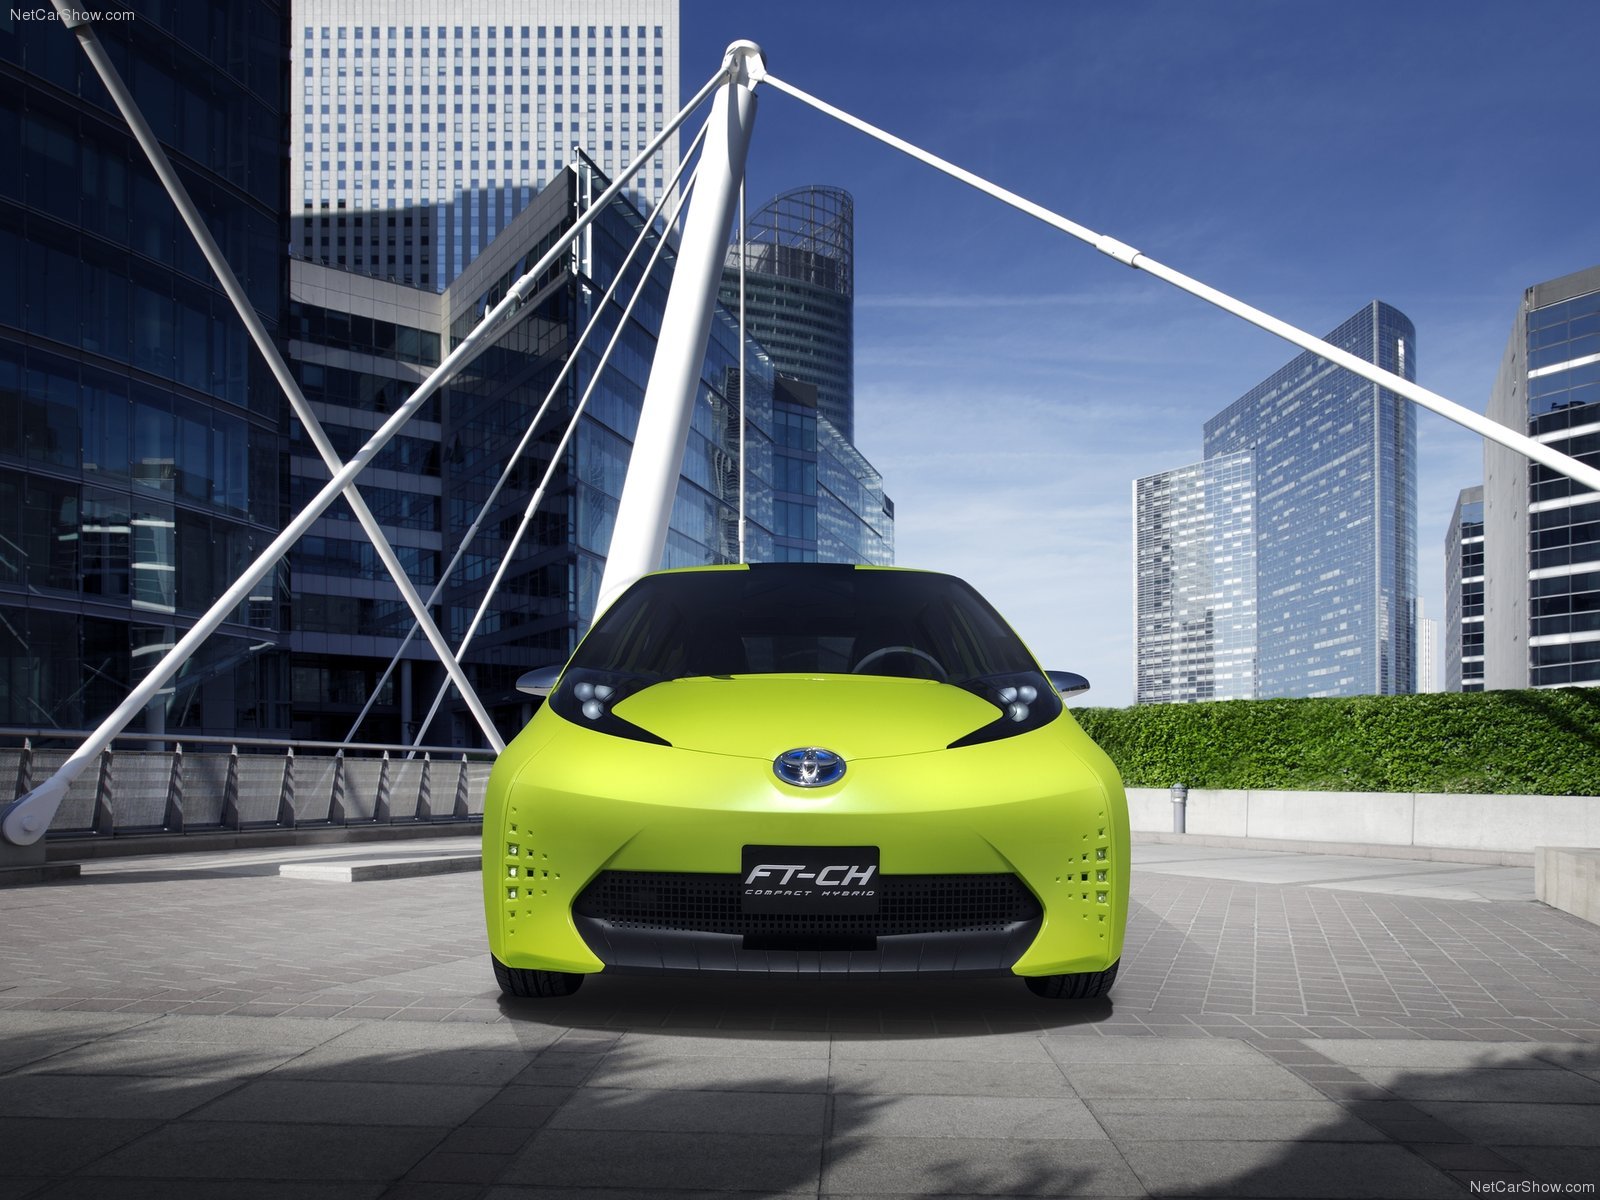 toyota, Ft ch, Concept, Cars, 2010 Wallpaper